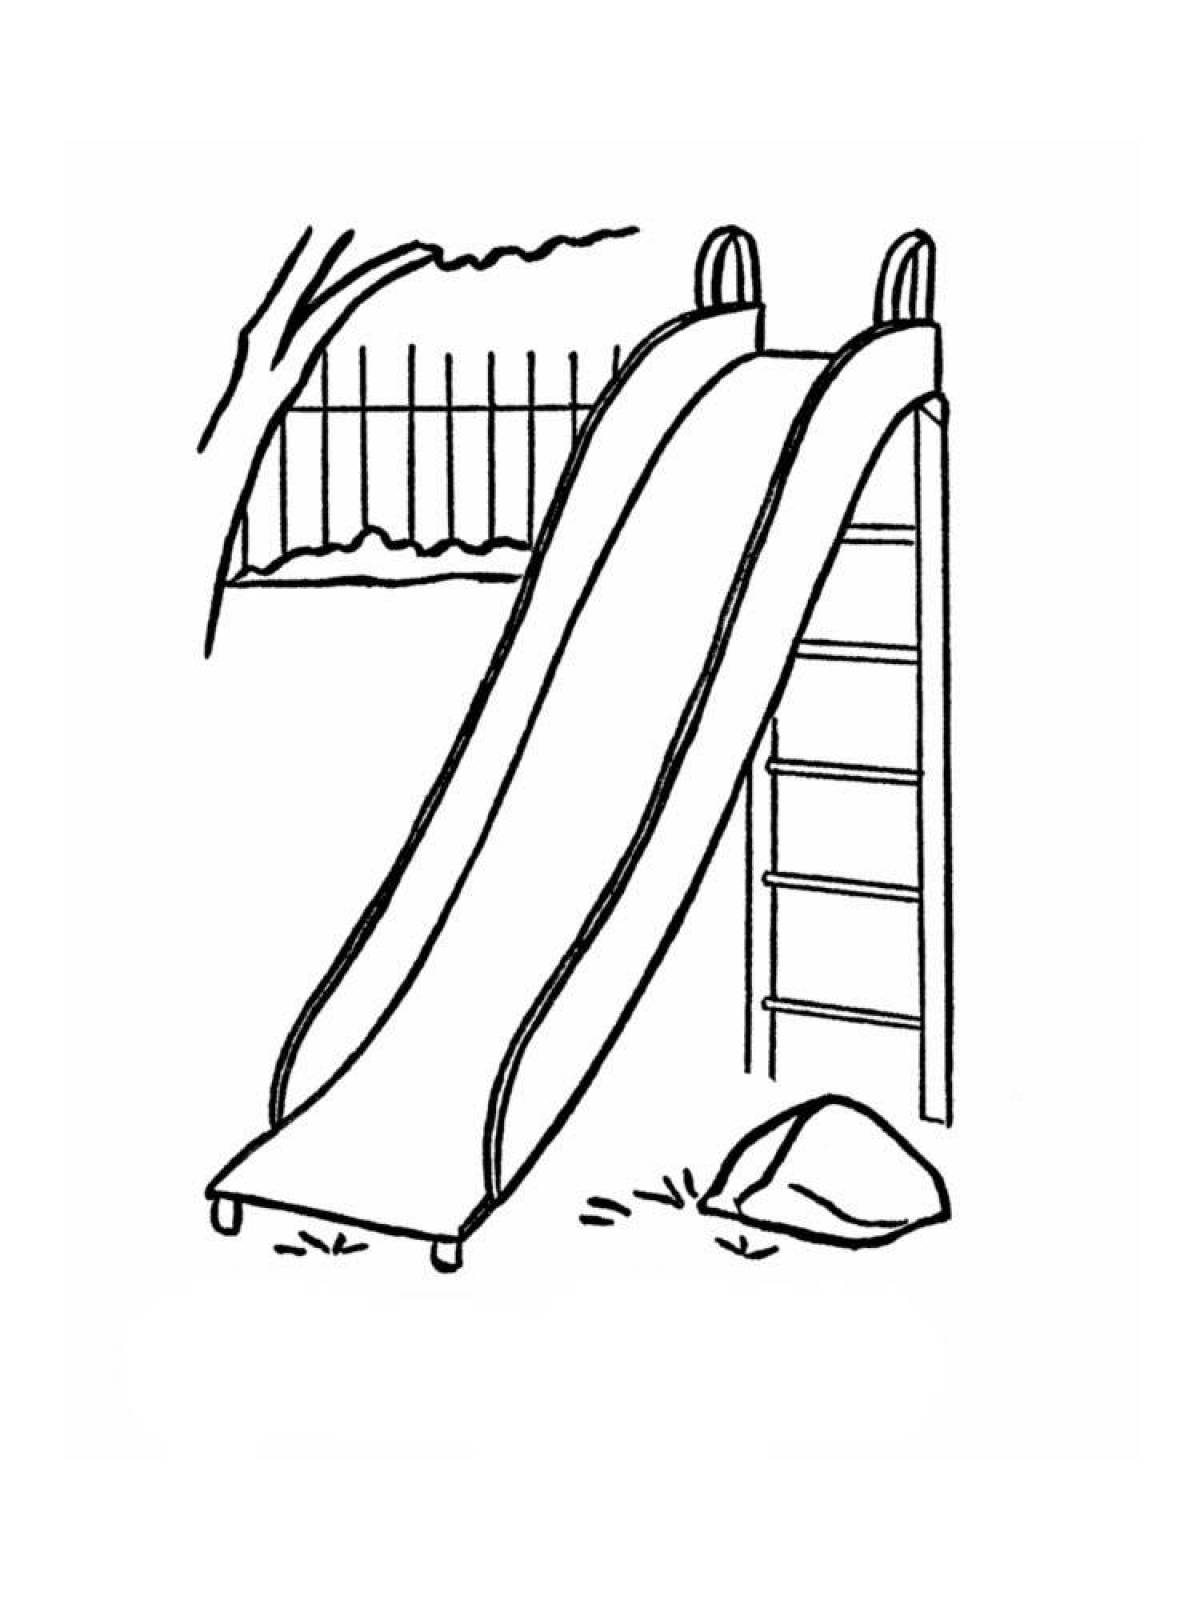 Slide Eater coloring page